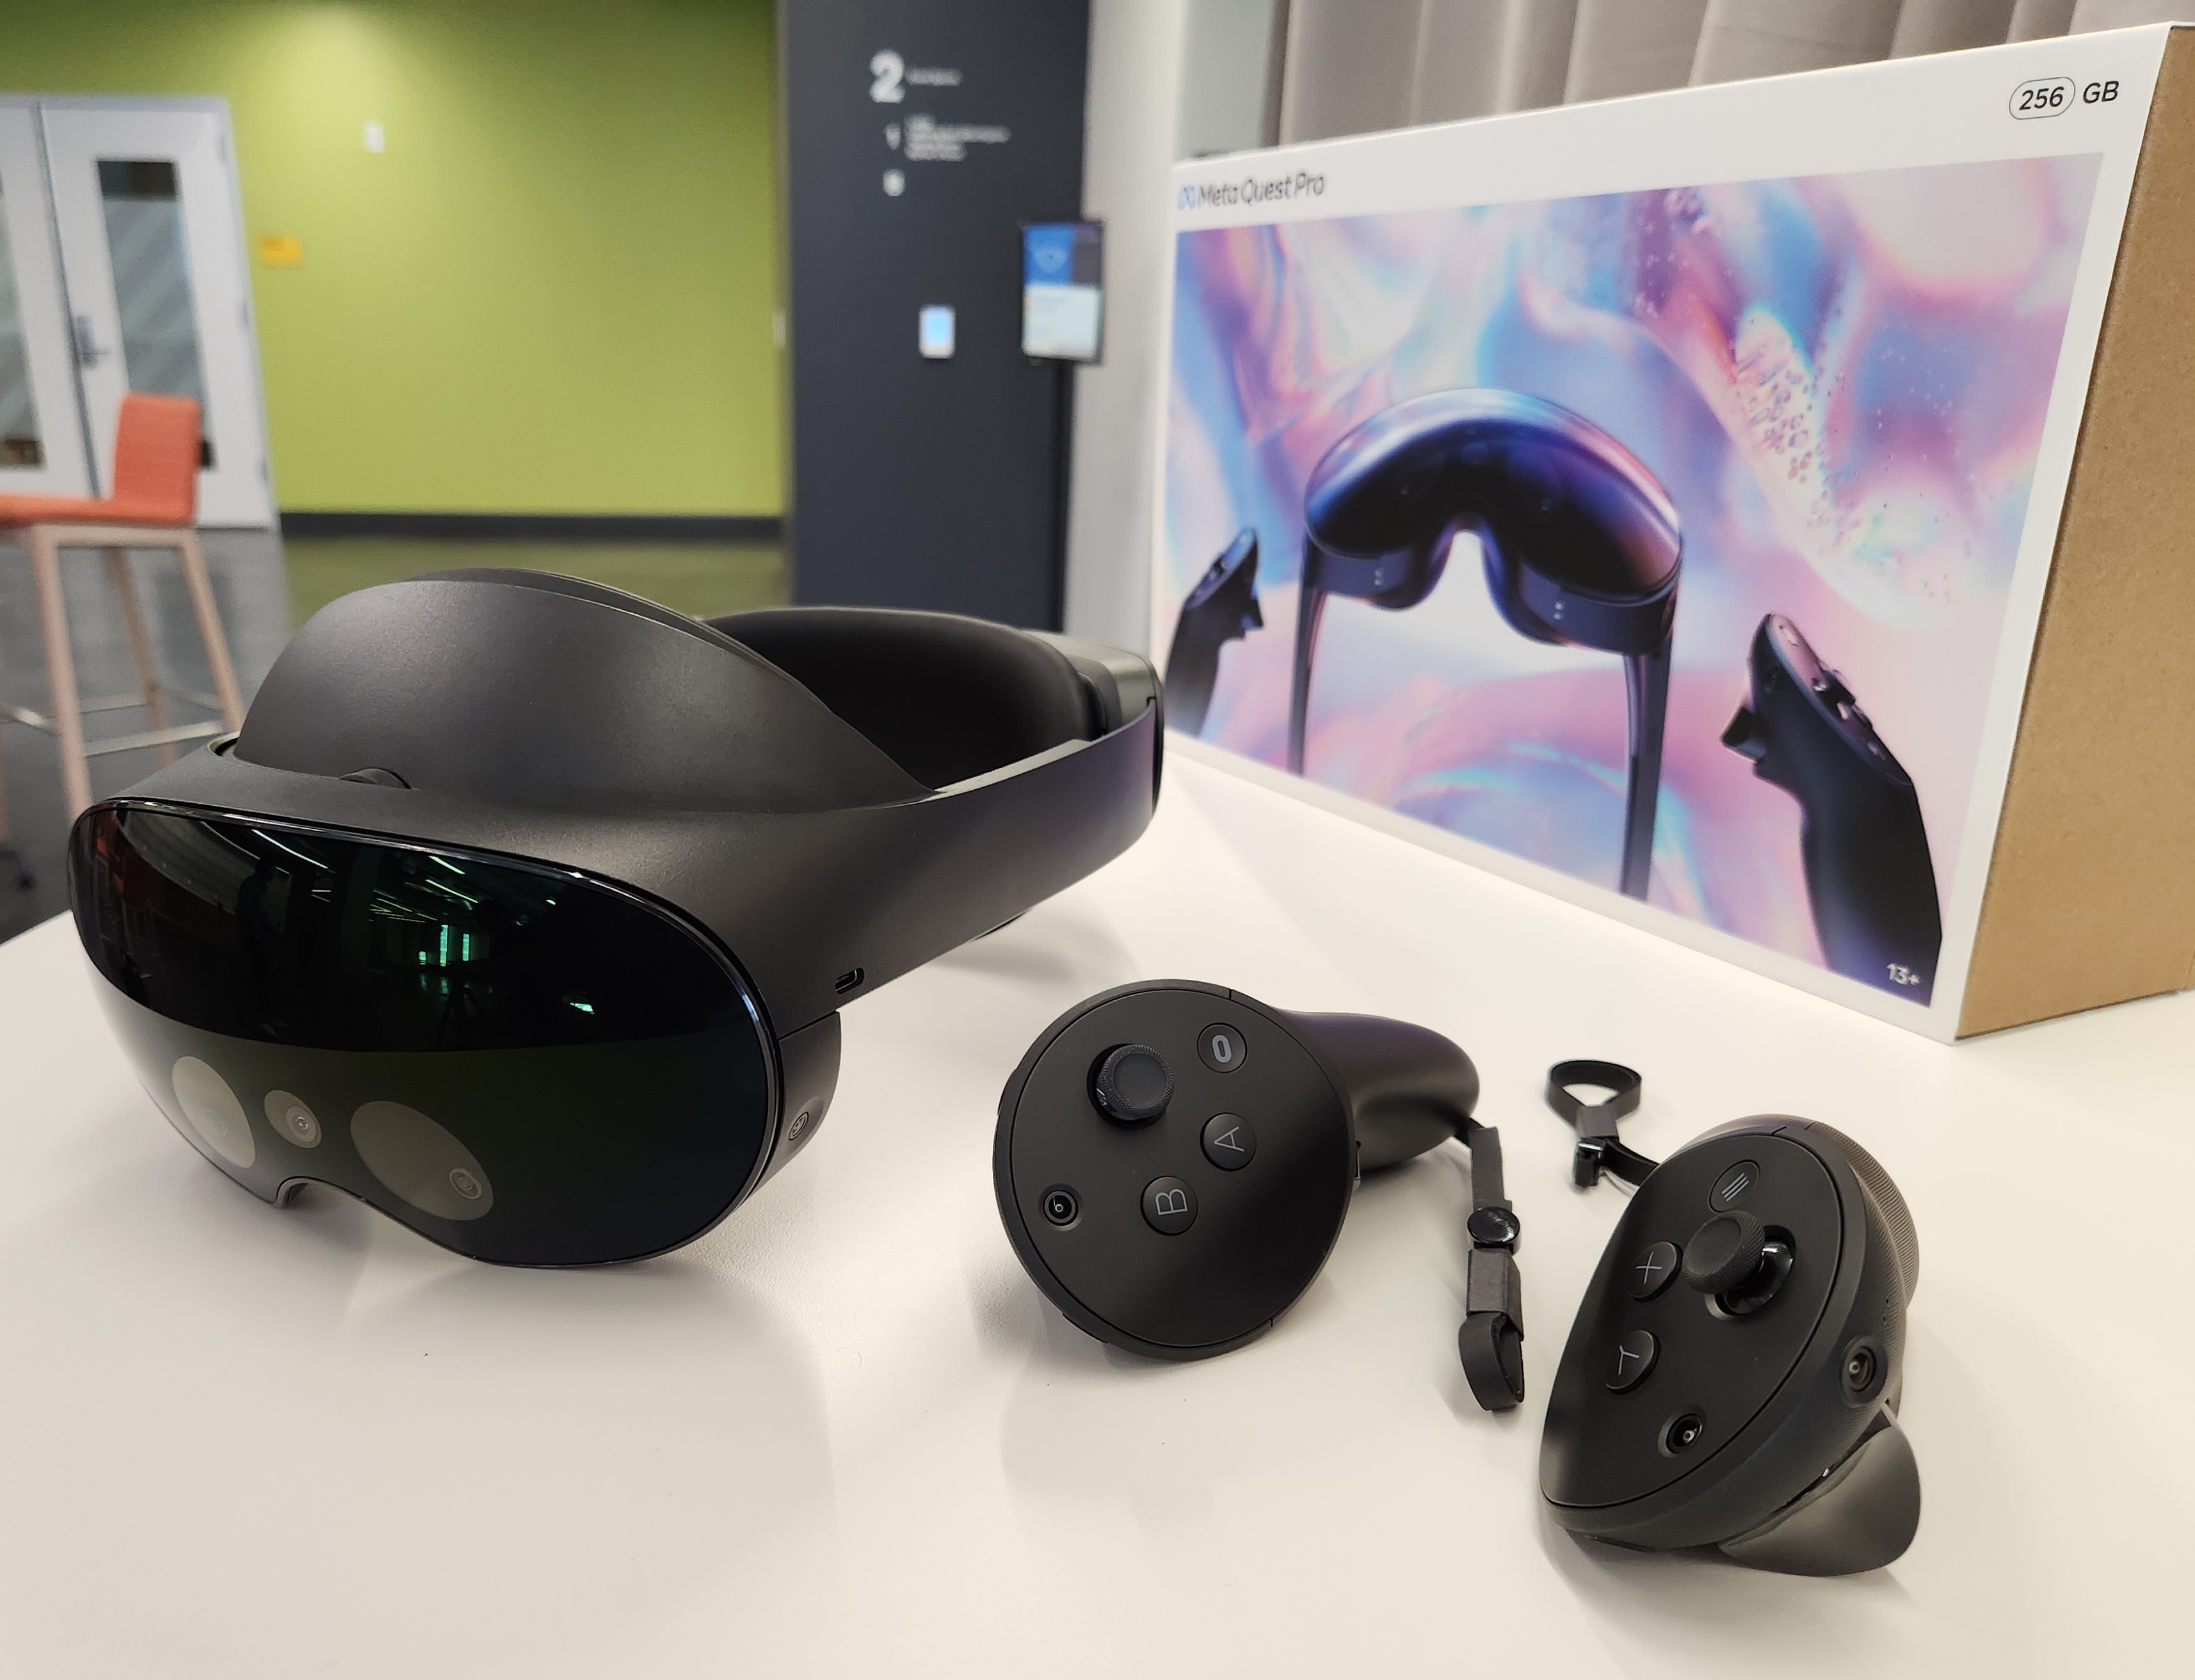 Hands on: The Meta Quest Pro headset delivers pricey VR power